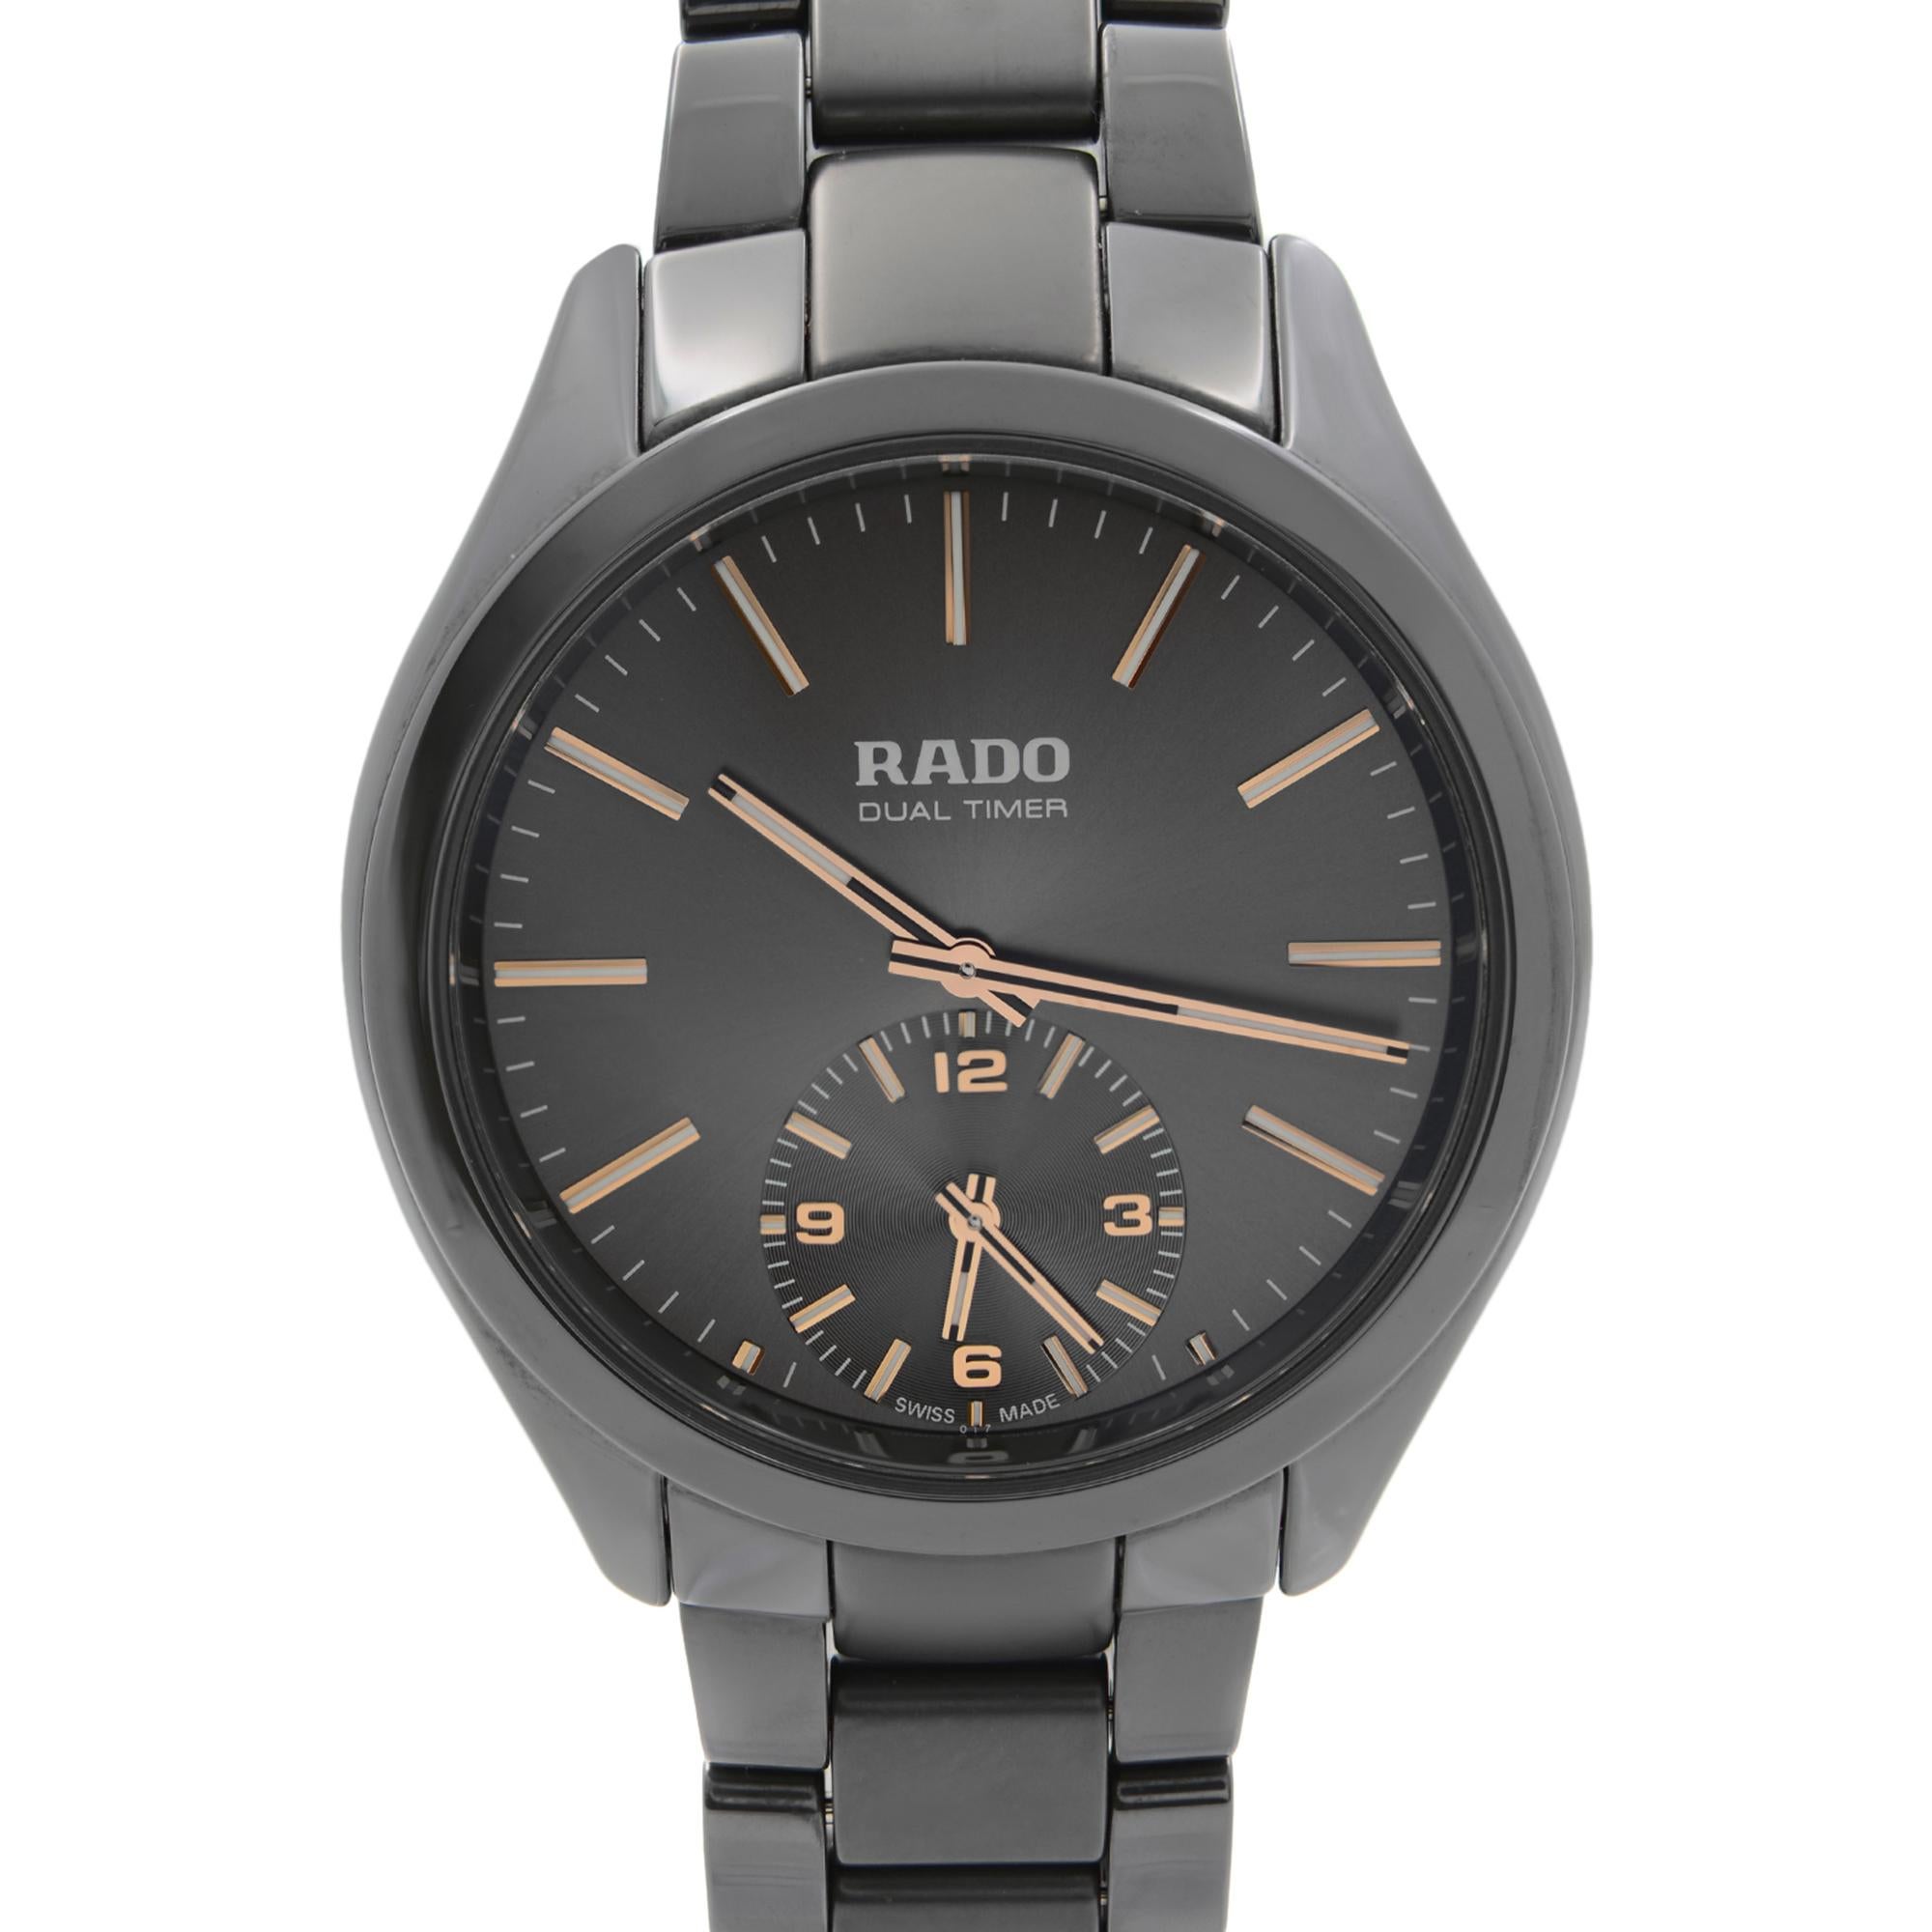 Display Model Rado Hyperchrome Ceramic Touch Dual Timer Grey Dial Quartz Men's Watch R32102172. The Watch Might have Minor Blemishes Due to Store Handling. Comes with Chronostore Box and Chronostore Authenticity Card. Covered by 3-year Chronostore